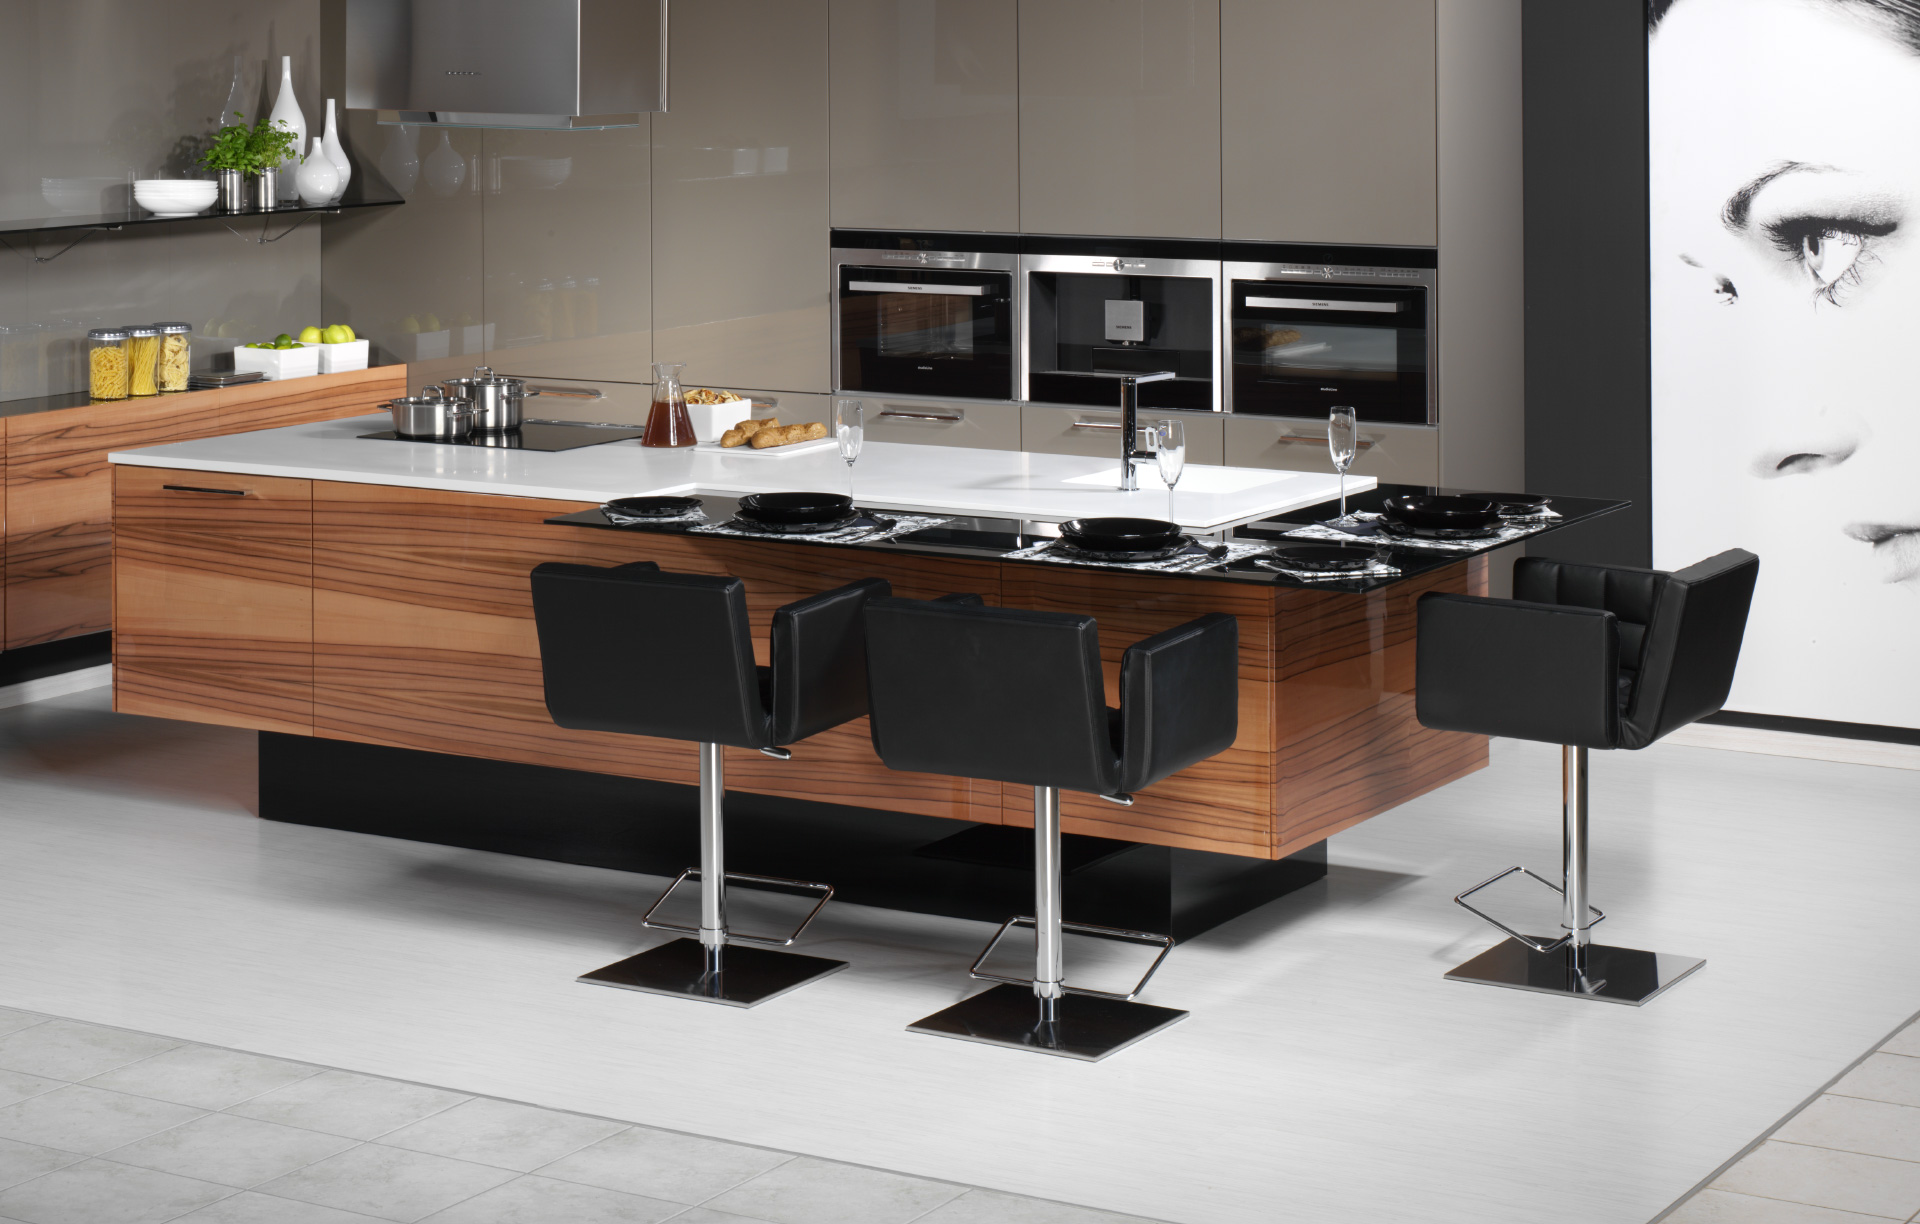 The impressive appearance of this LINE / PALOMA kitchen is due to the successful combination of veneered and lacquered surfaces and clear simple contours.